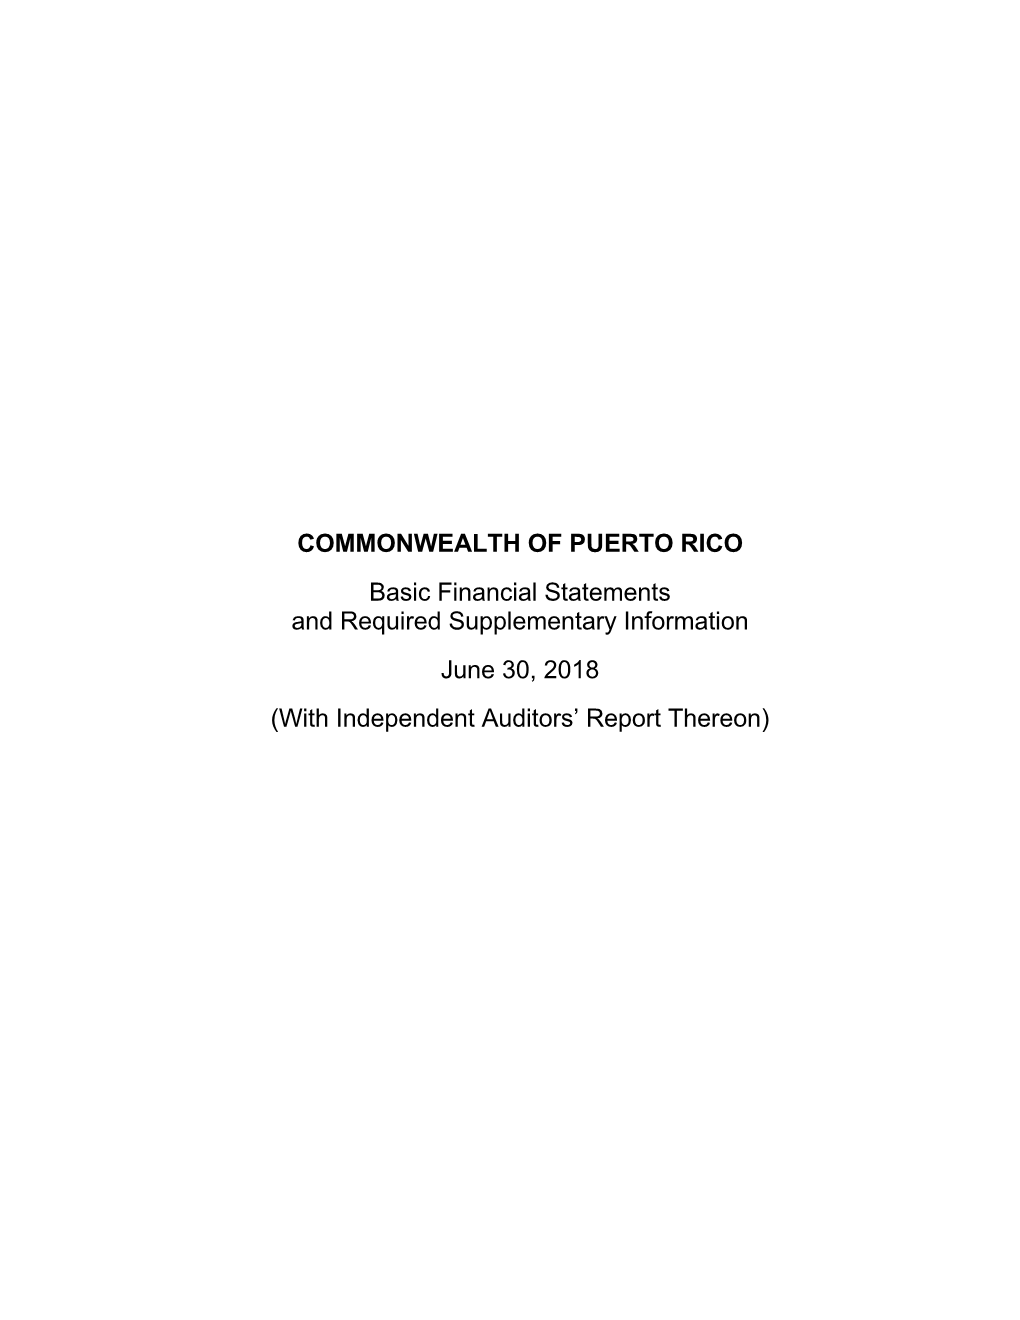 COMMONWEALTH of PUERTO RICO Basic Financial Statements and Required Supplementary Information June 30, 2018 (With Independent Auditors’ Report Thereon)